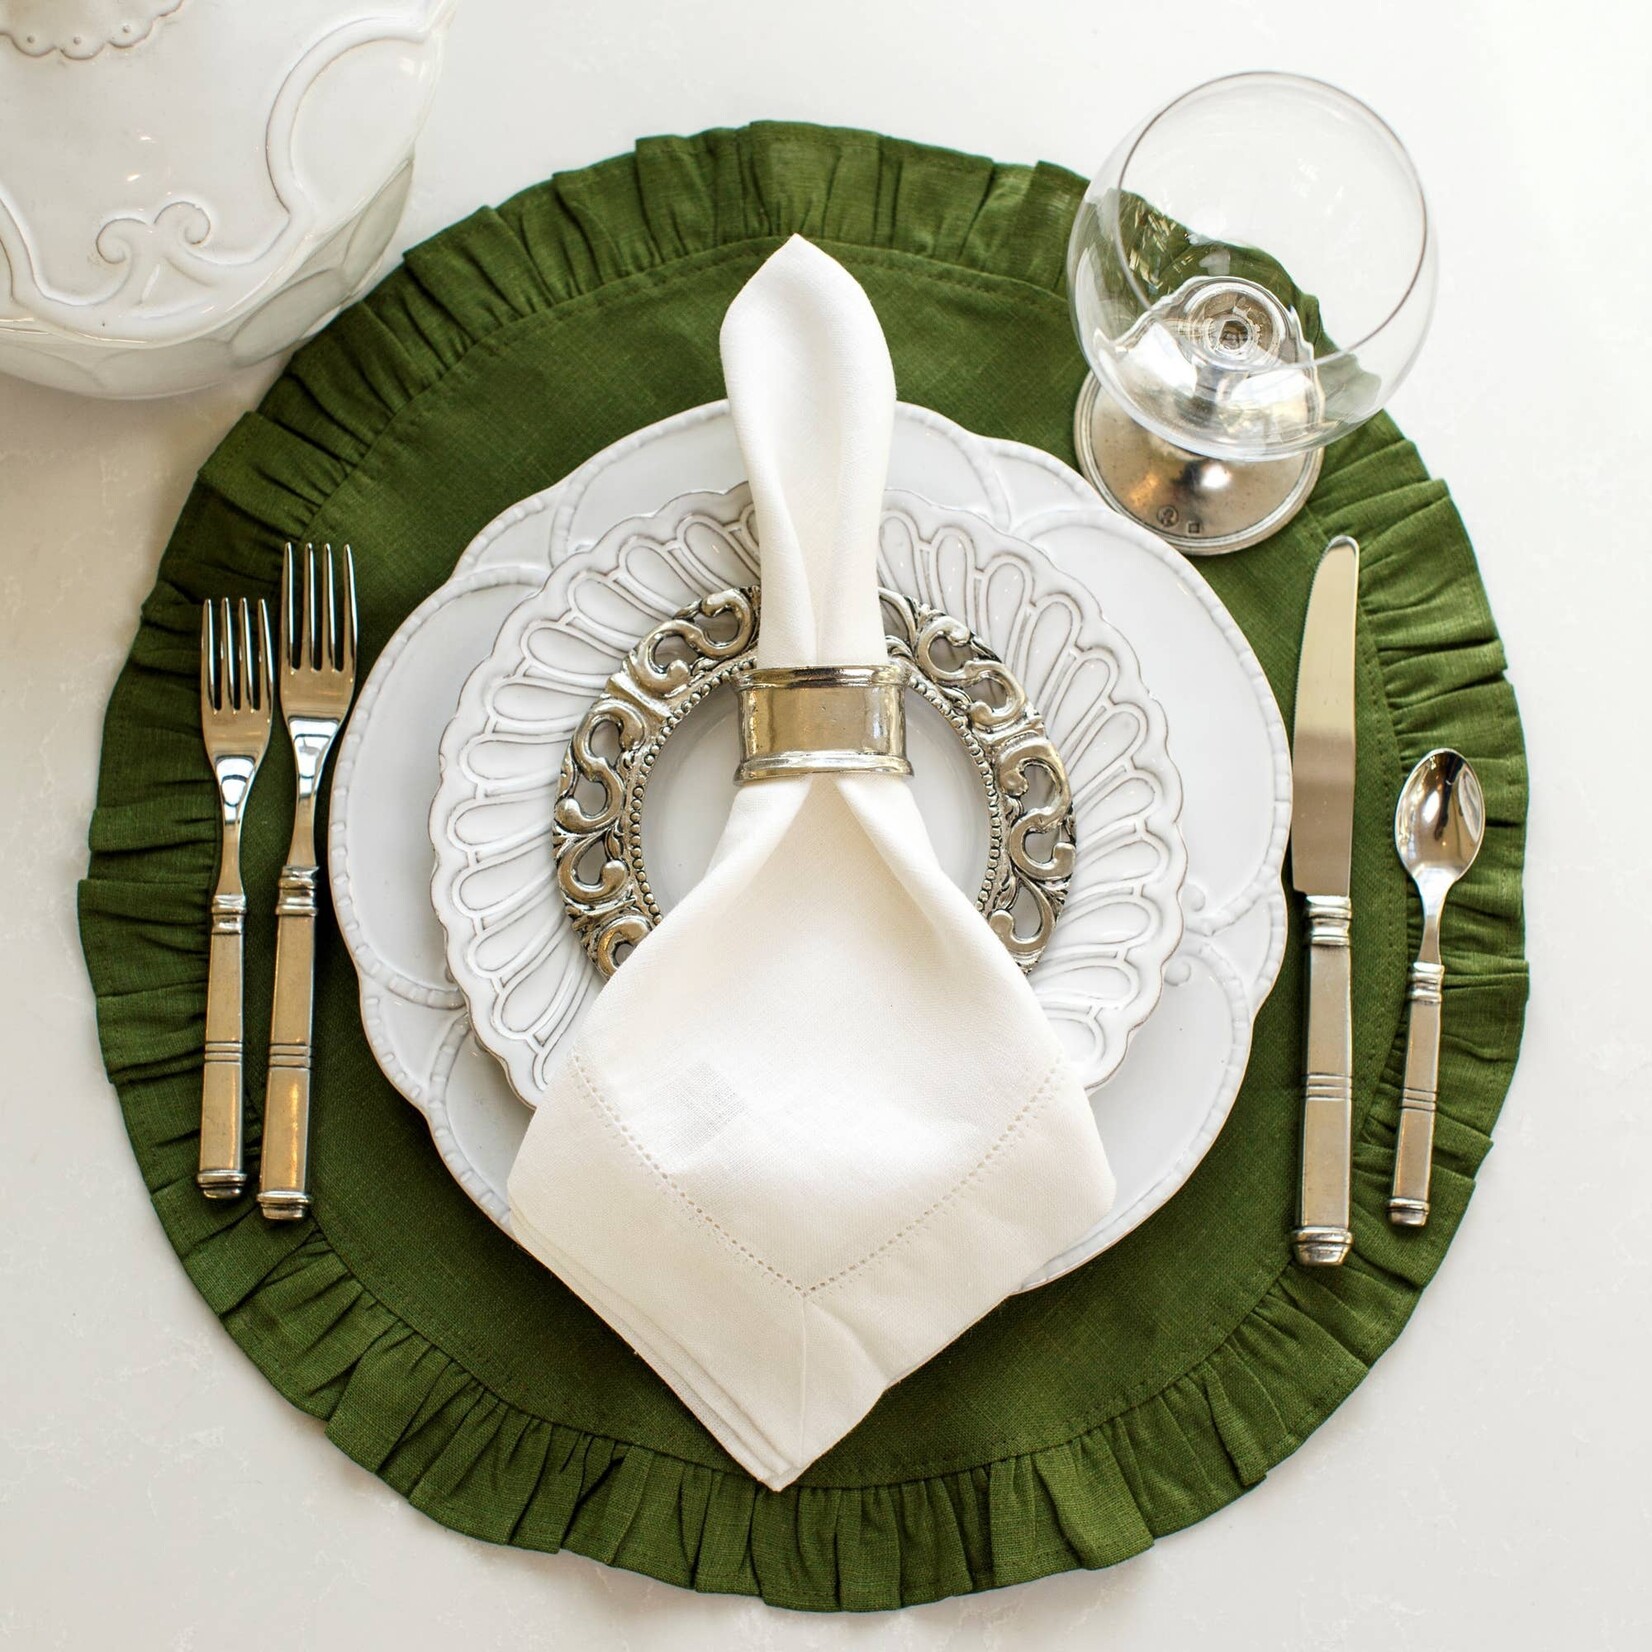 Arte Italica Round Ruffle Linen Placemat in Evergreen (Set of 6)